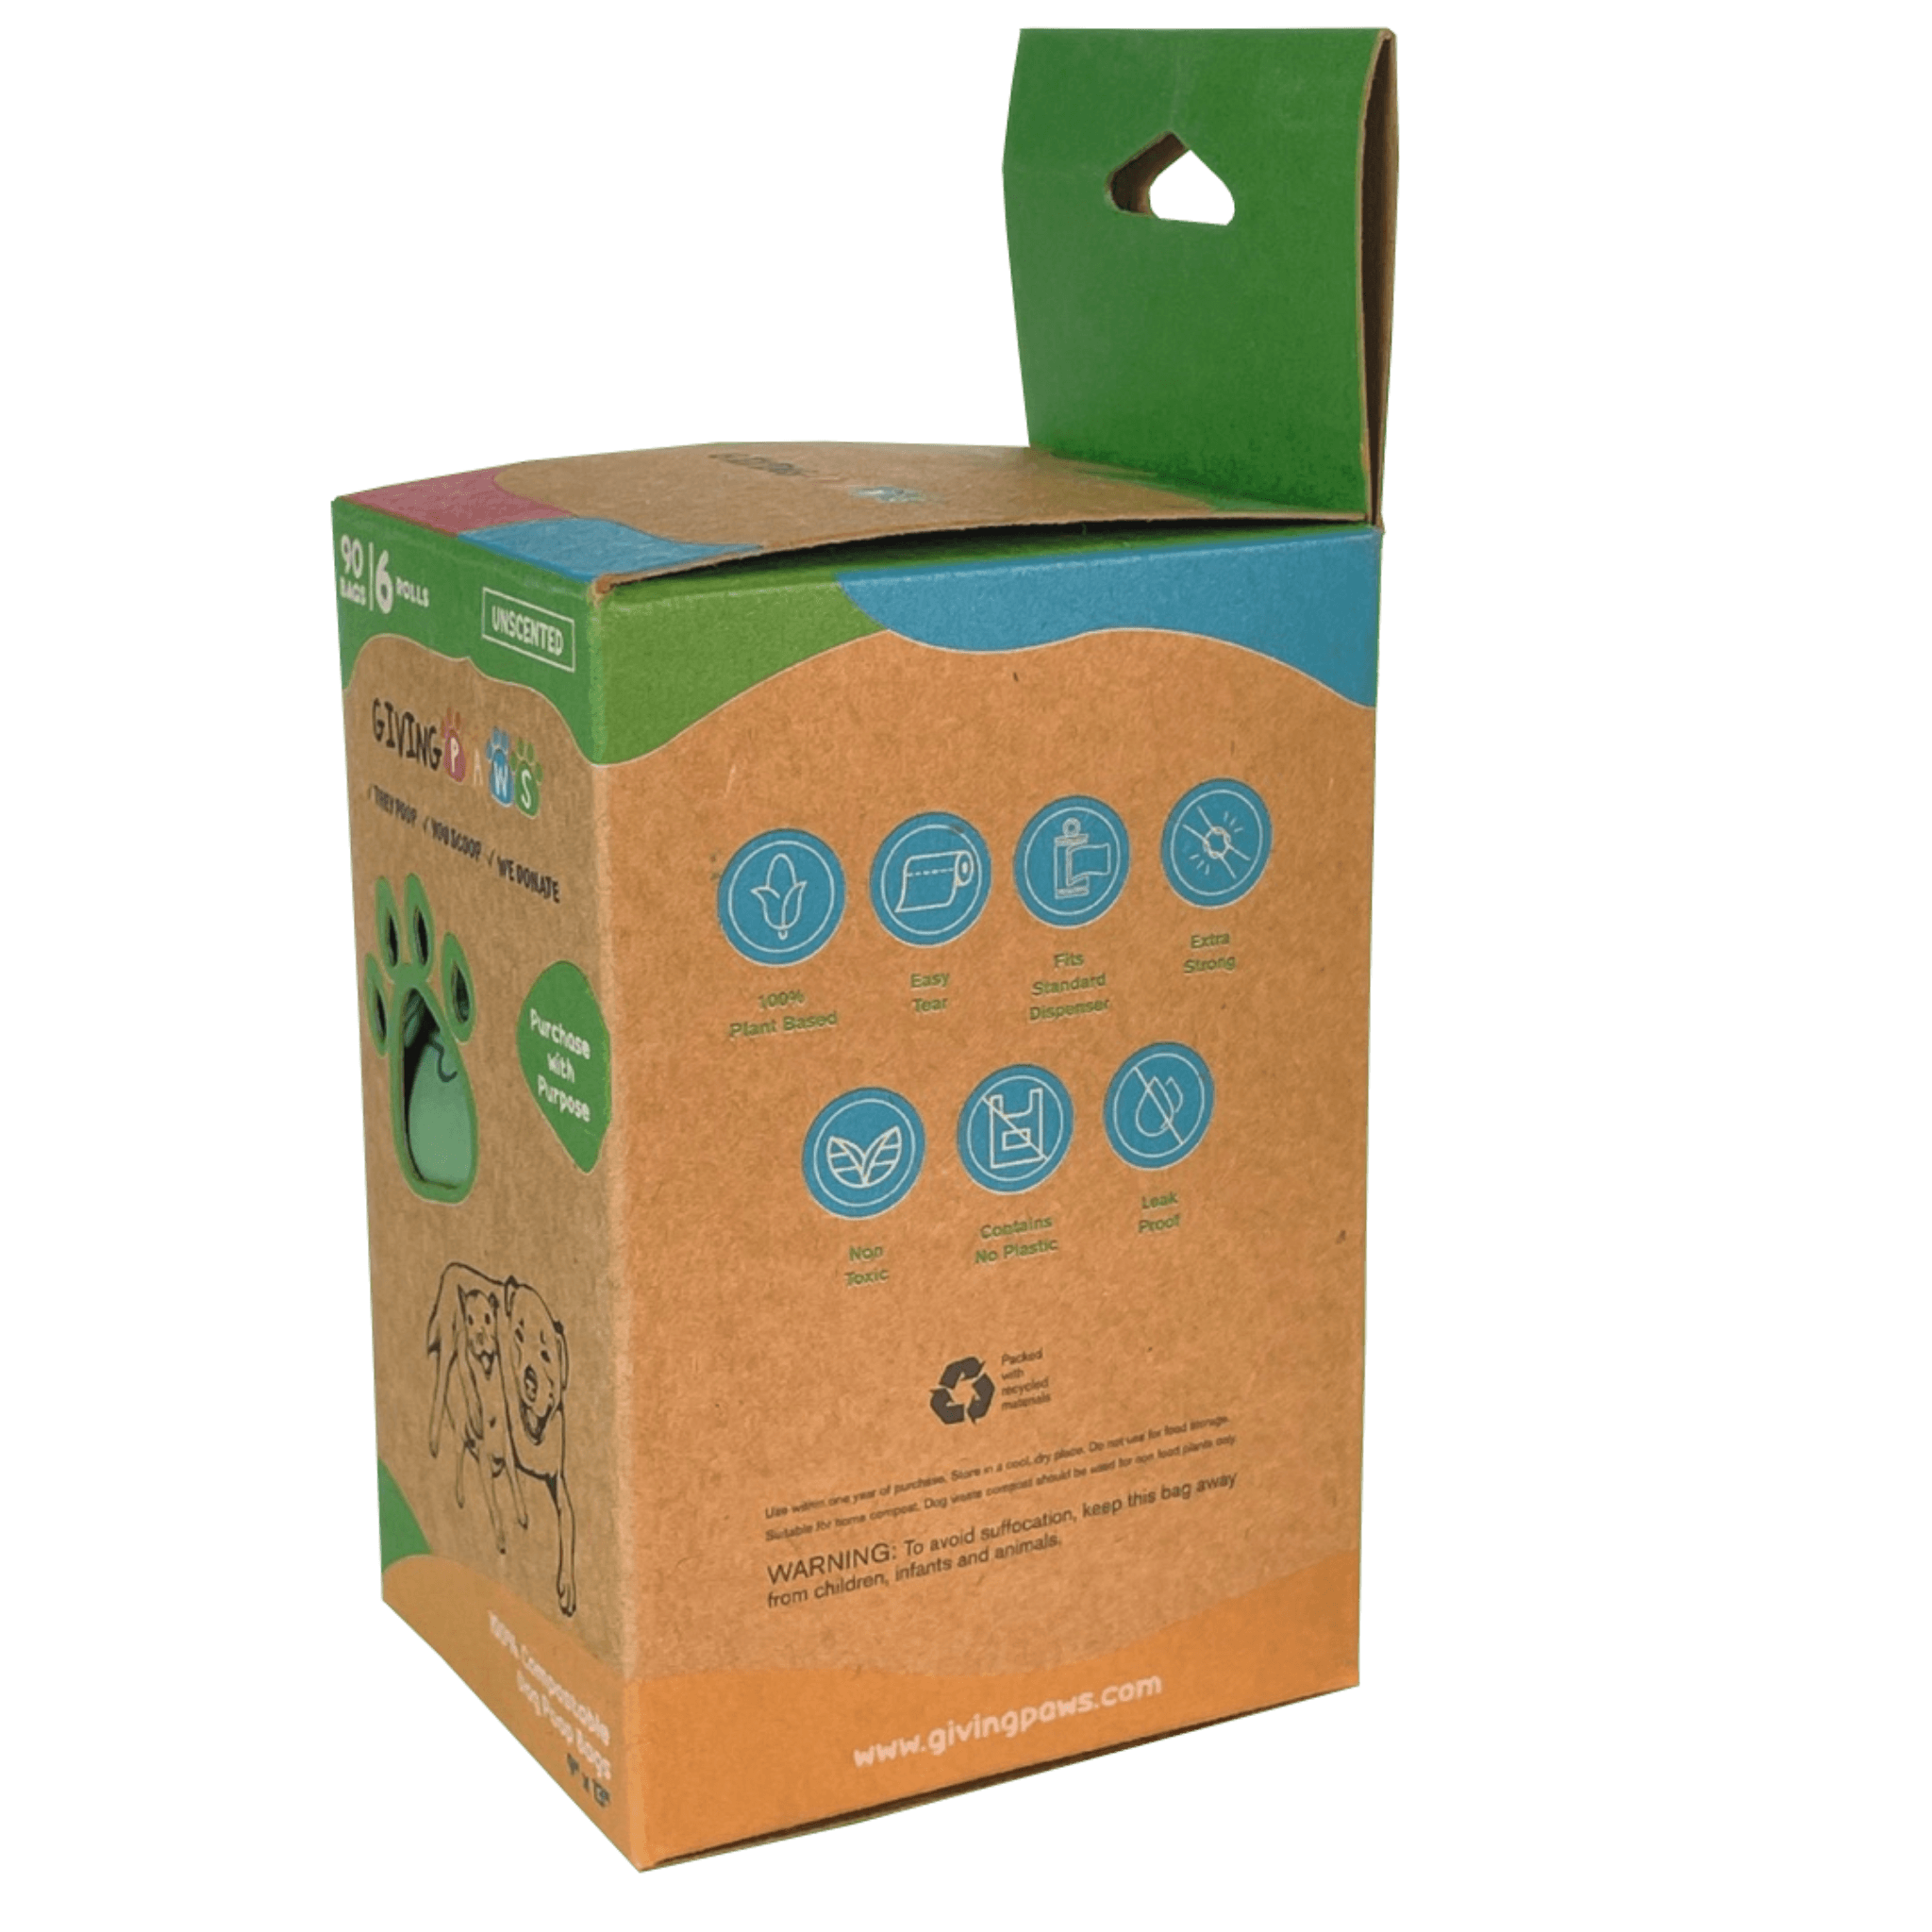 Compostable Dog Poop Bags | Los Angeles, CA | Giving Paws